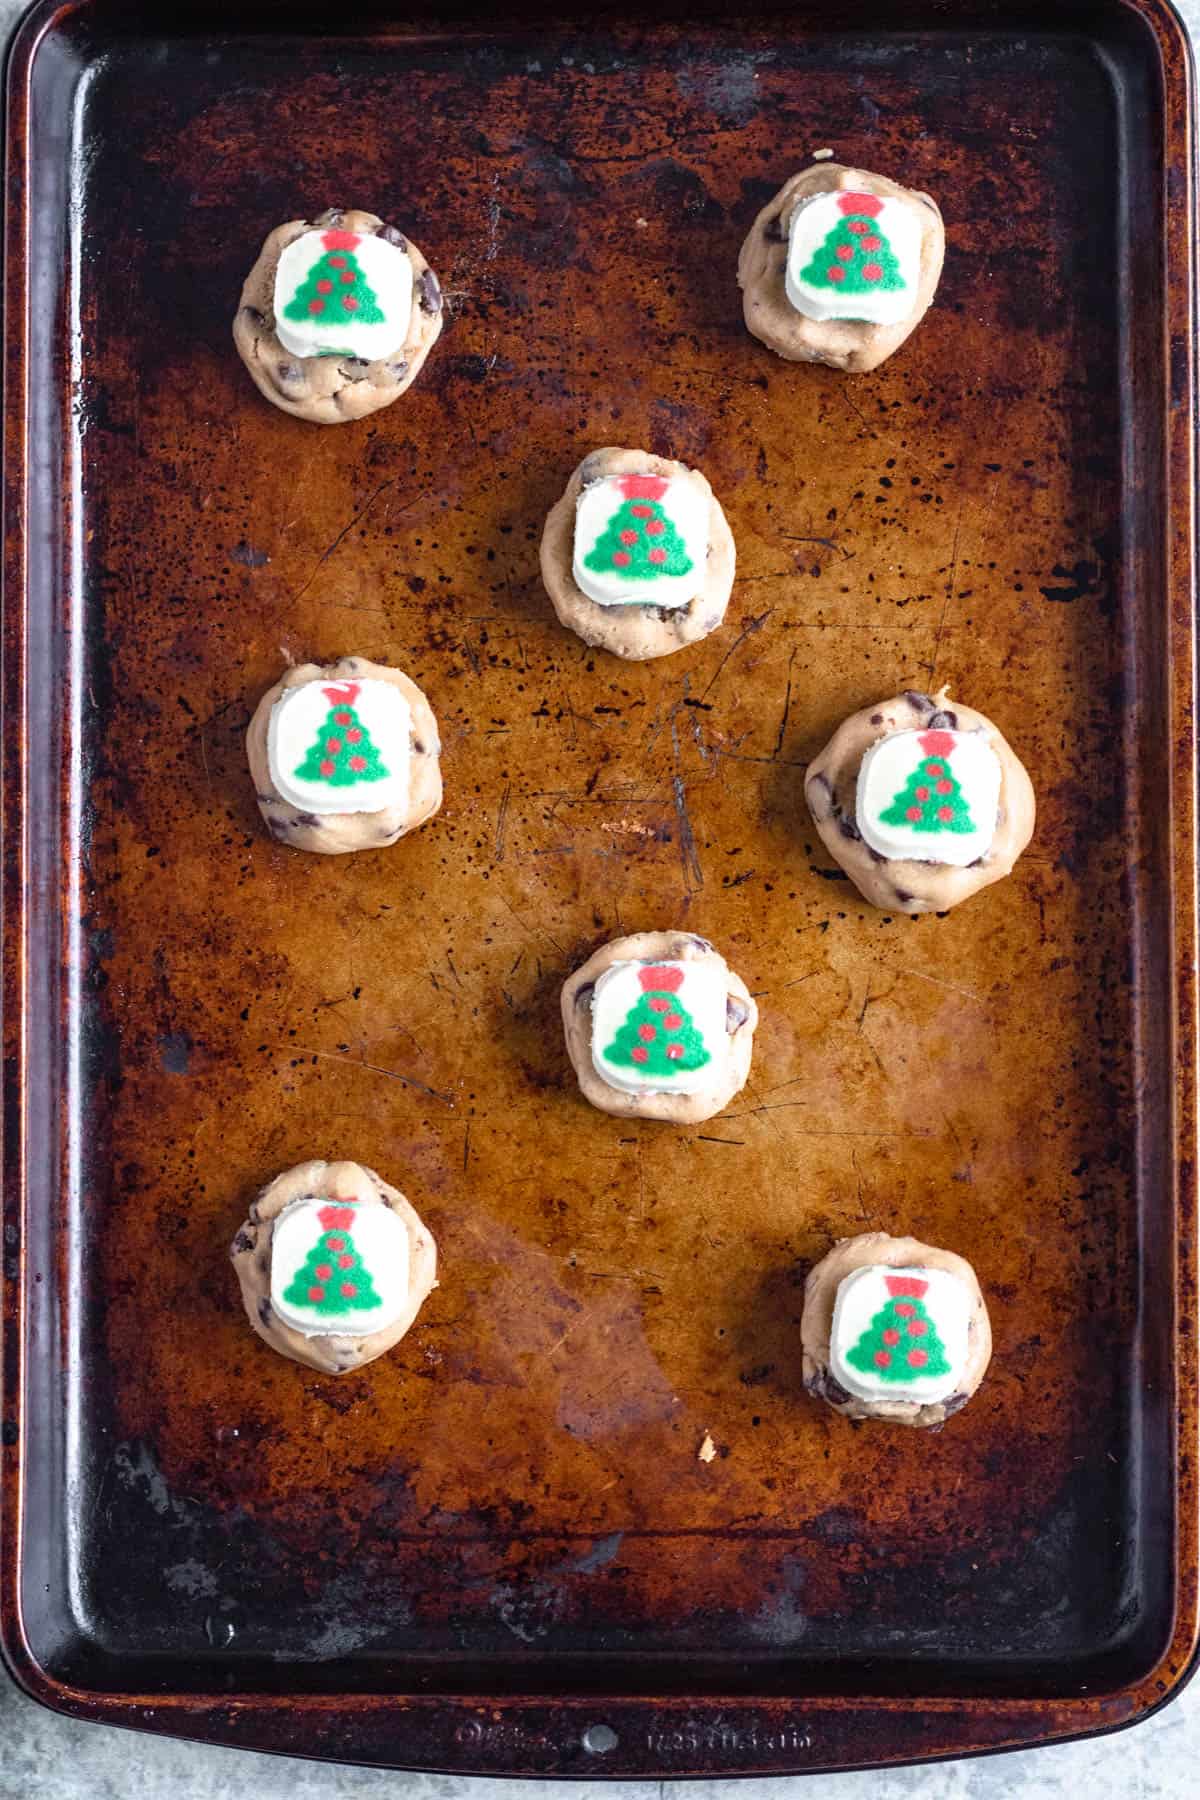 A pillsbury christmas sugar cookie placed on top of the chocolate chip cookie dough. 